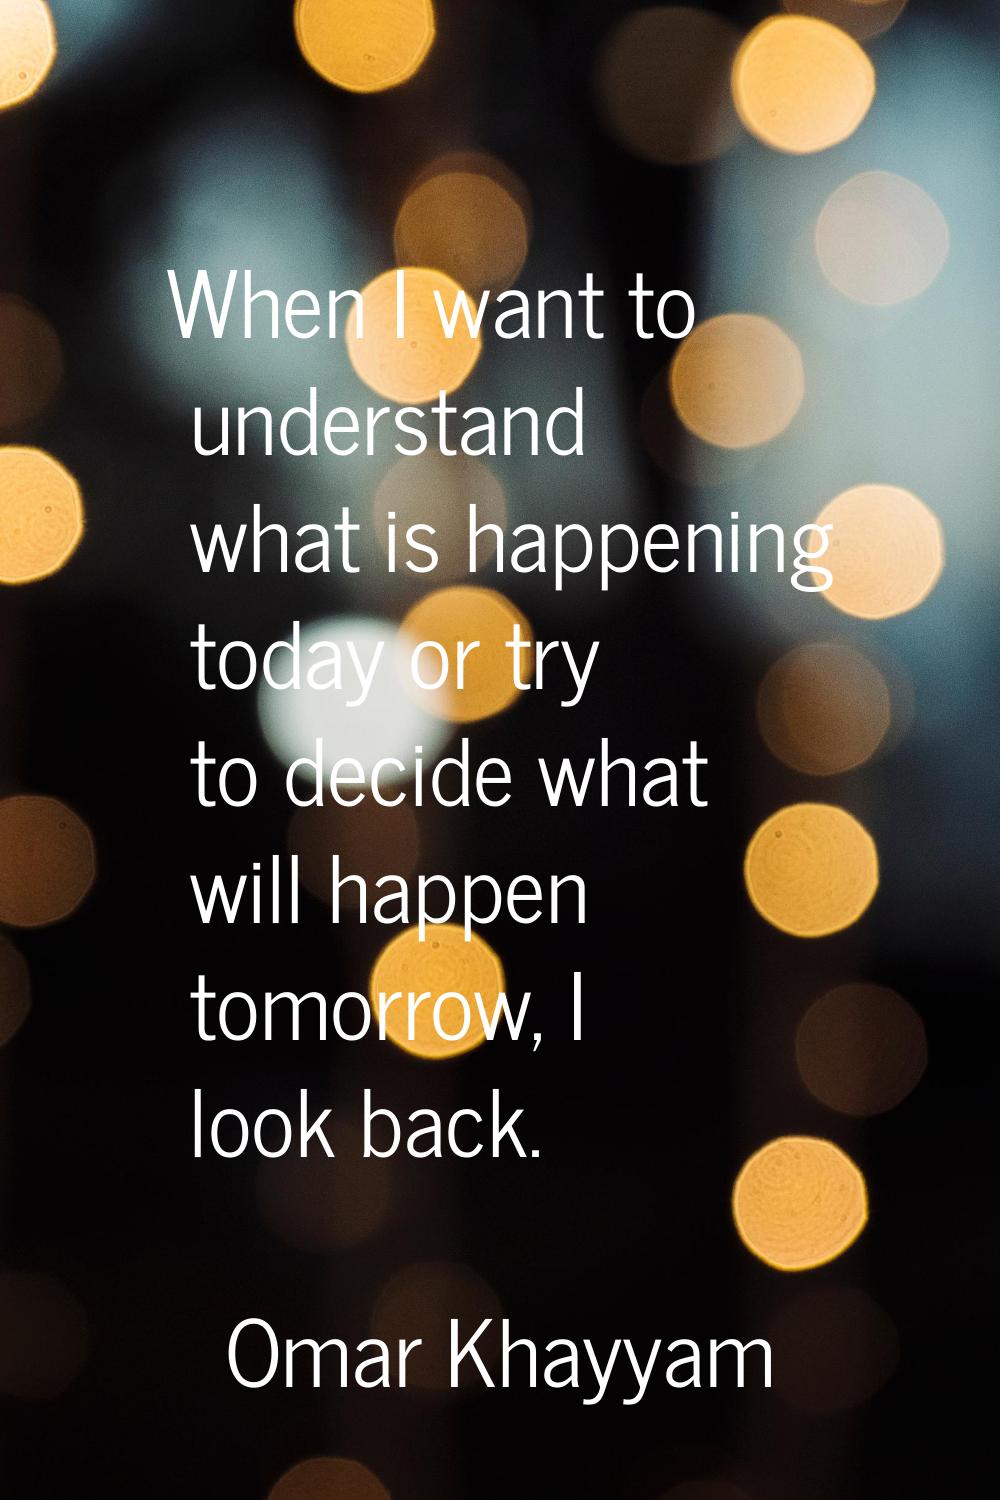 When I want to understand what is happening today or try to decide what will happen tomorrow, I loo